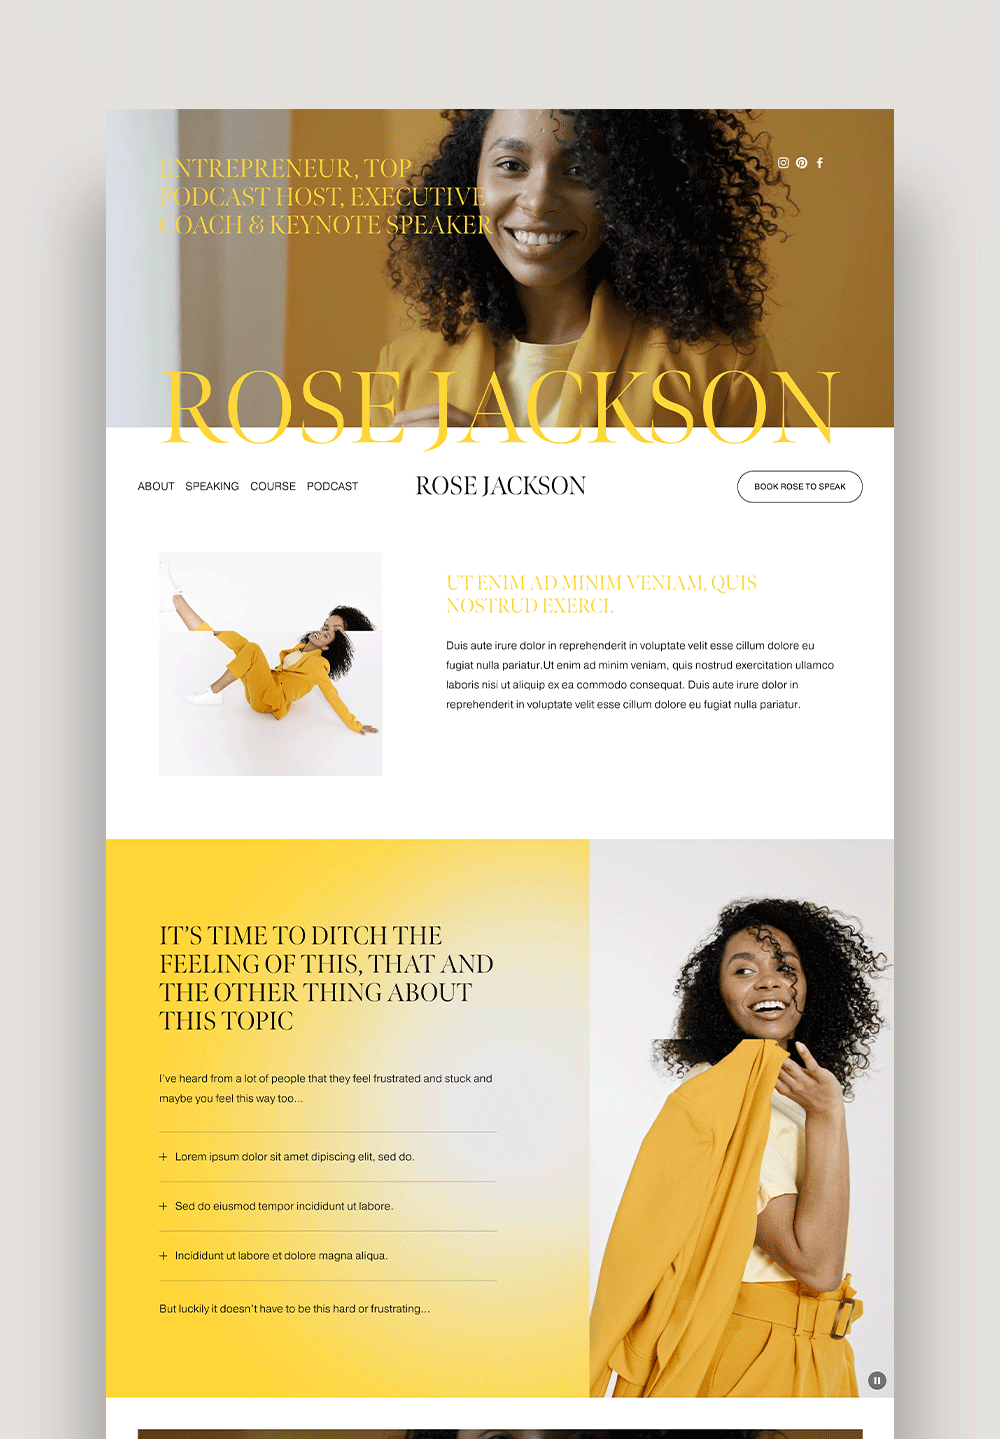 shop Best Squarespace  71 website Templates For Therapists personal website template Health Wellness fitness Coach Squarespace website template